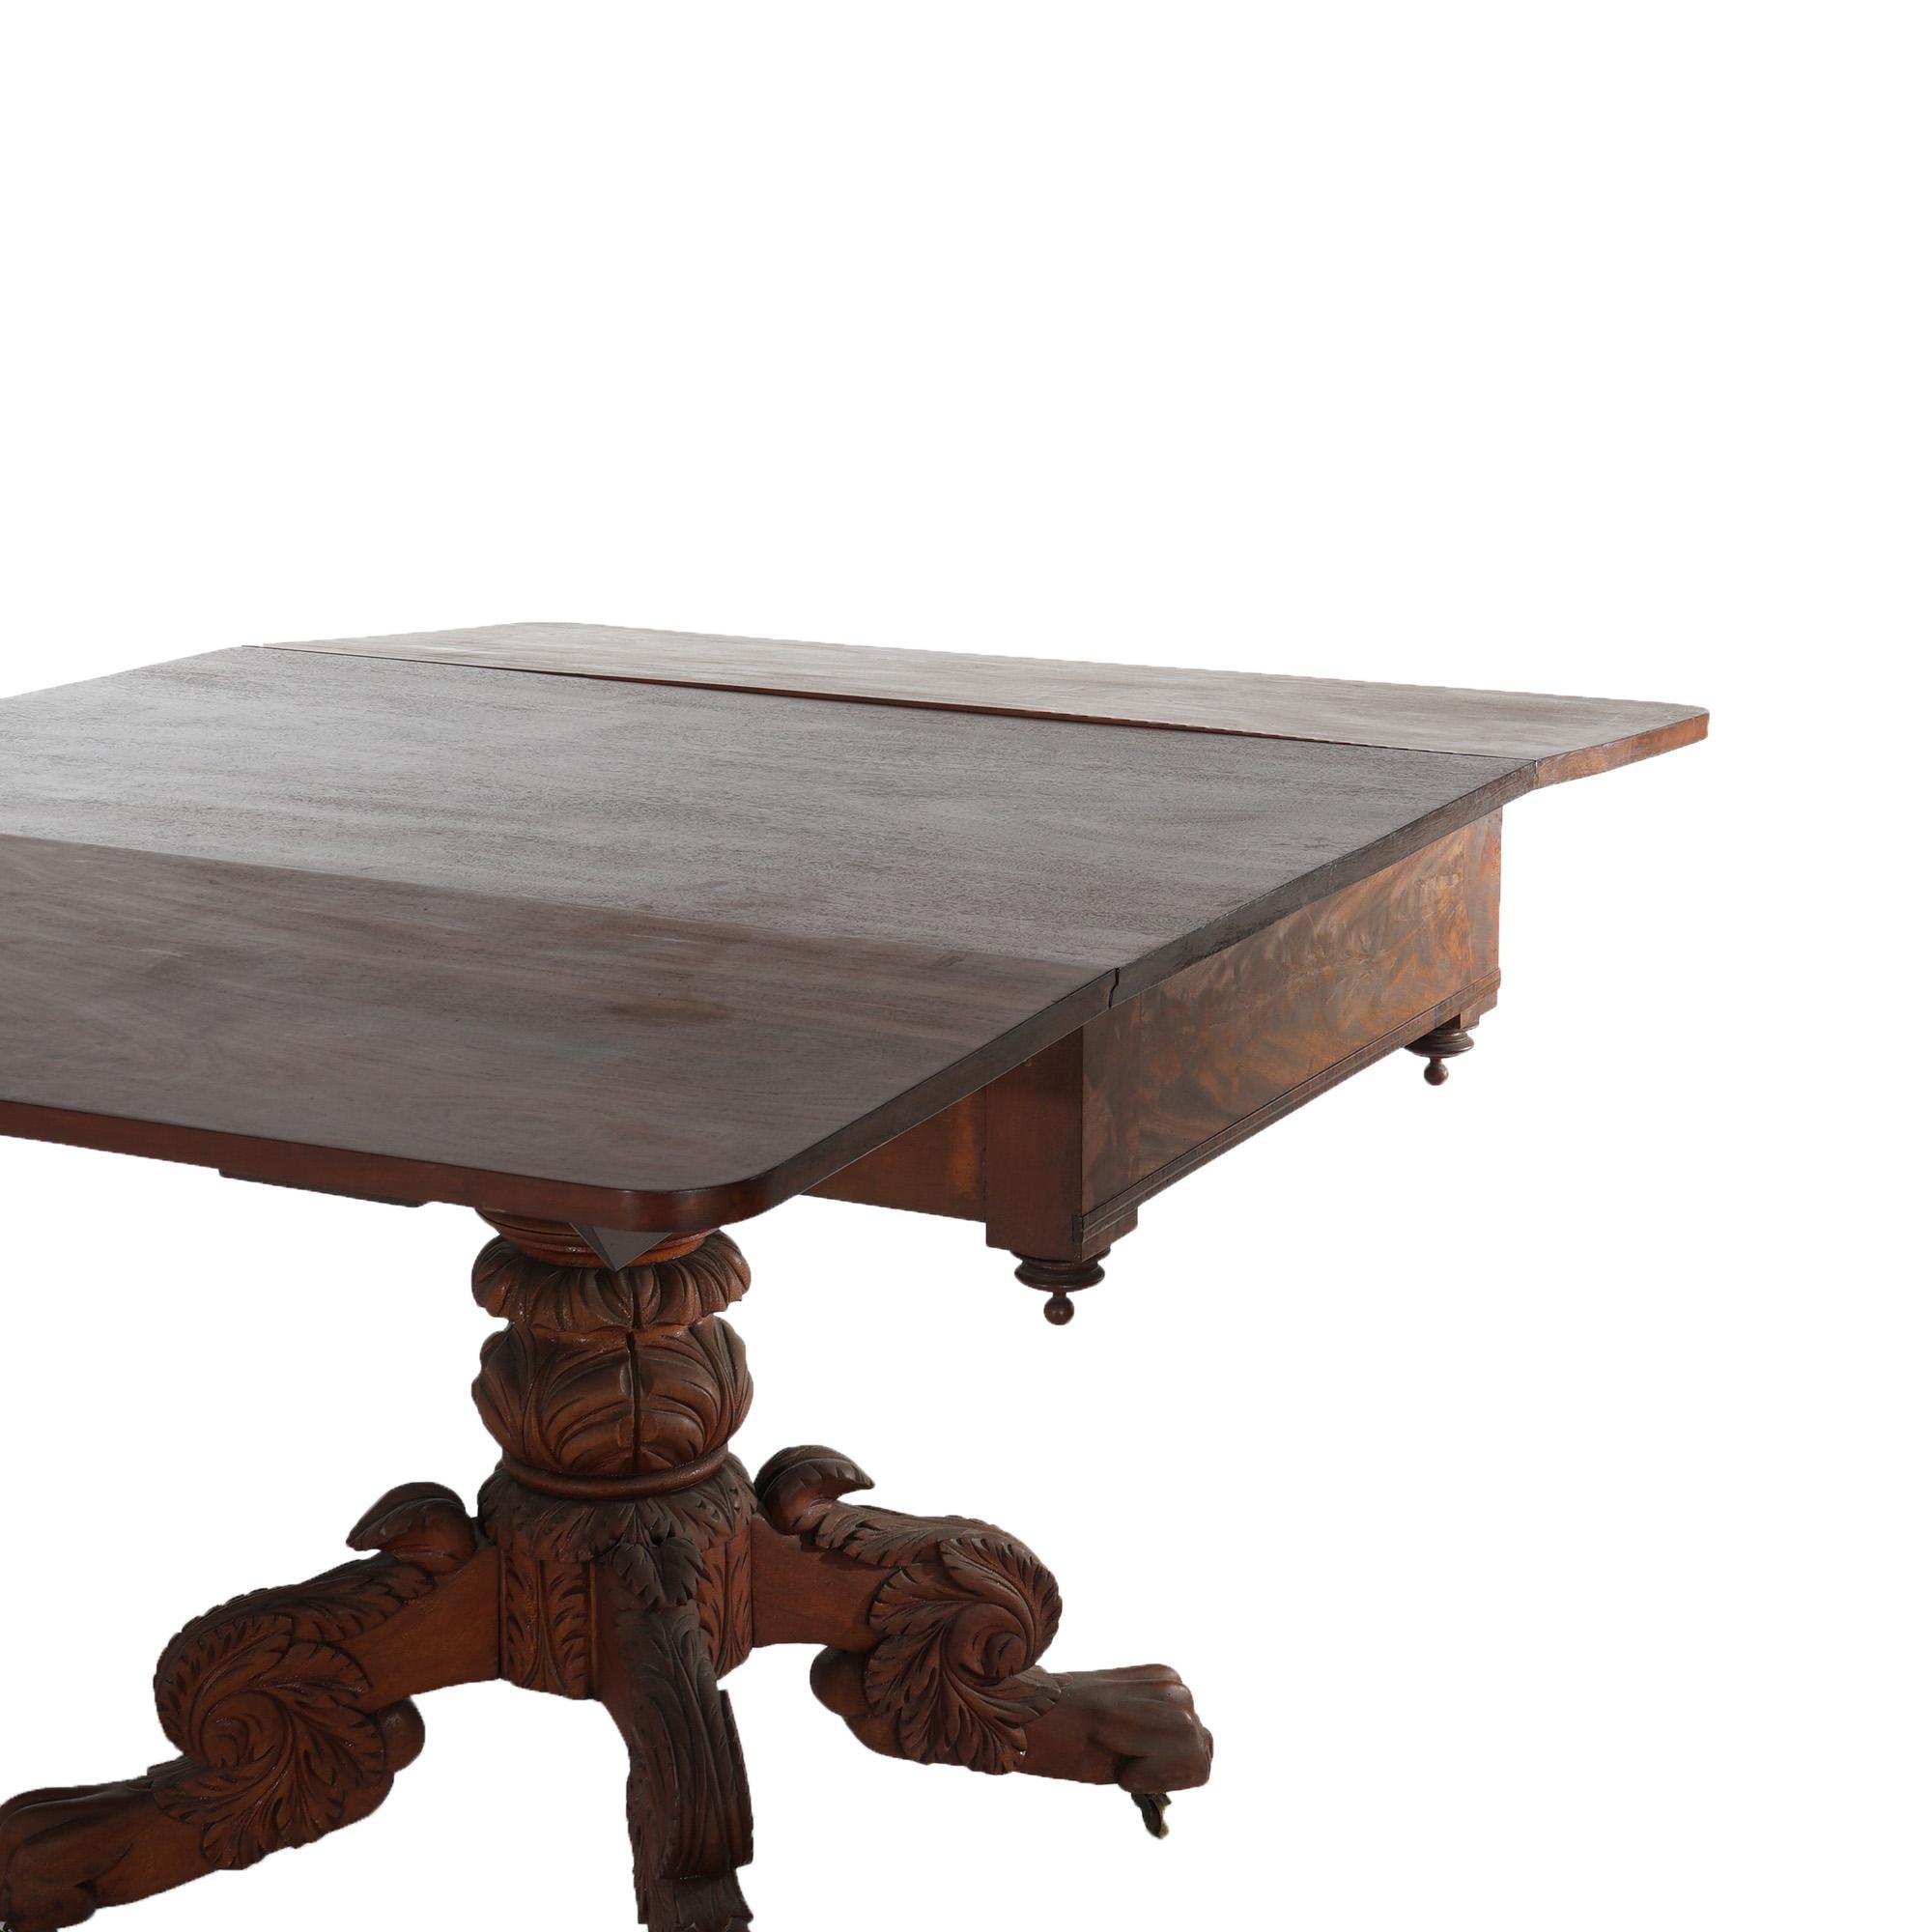 19th Century Antique Neoclassical American Empire Carved Flame Mahogany Drop Leaf Table c1880 For Sale